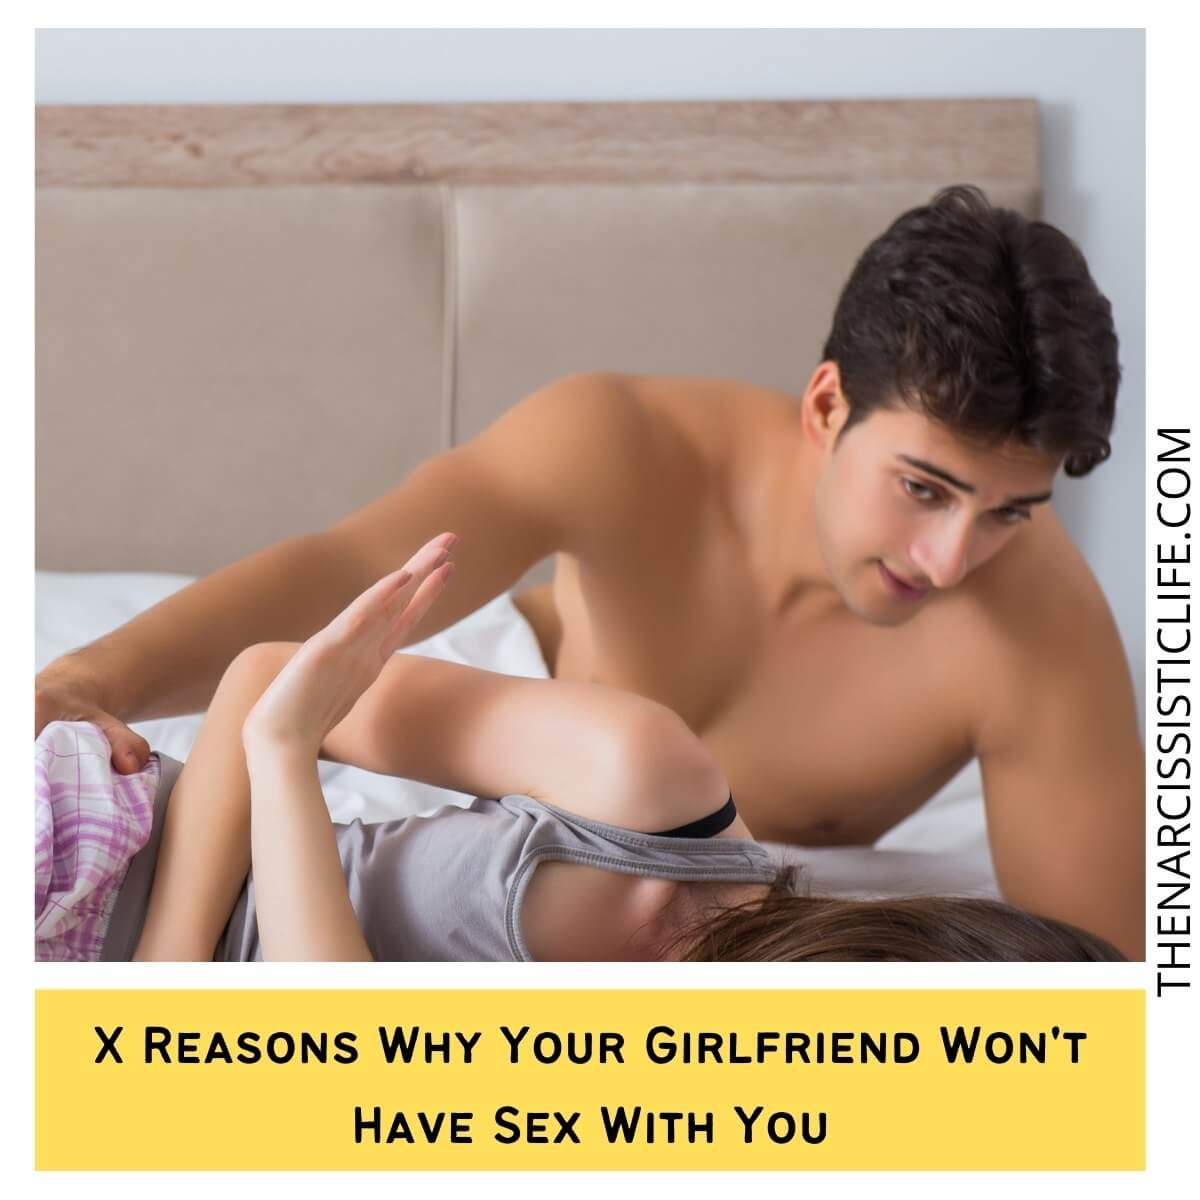 Help! My Girlfriend Wont Have Sex With Me Anymore image